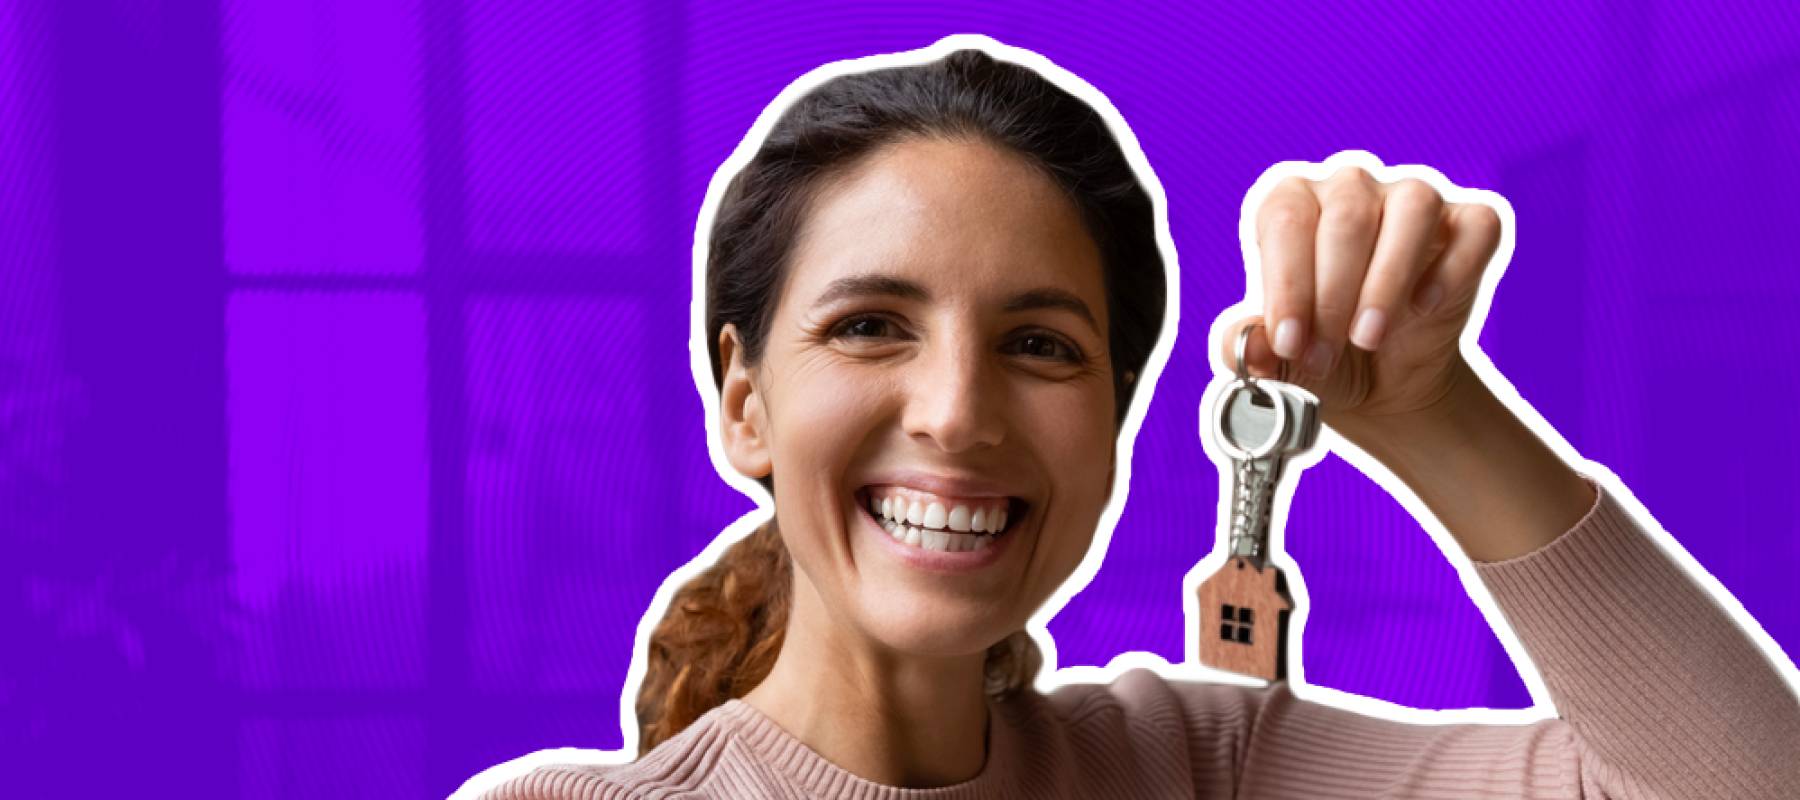 Excited young woman holds up a set of keys while taking a selfie.